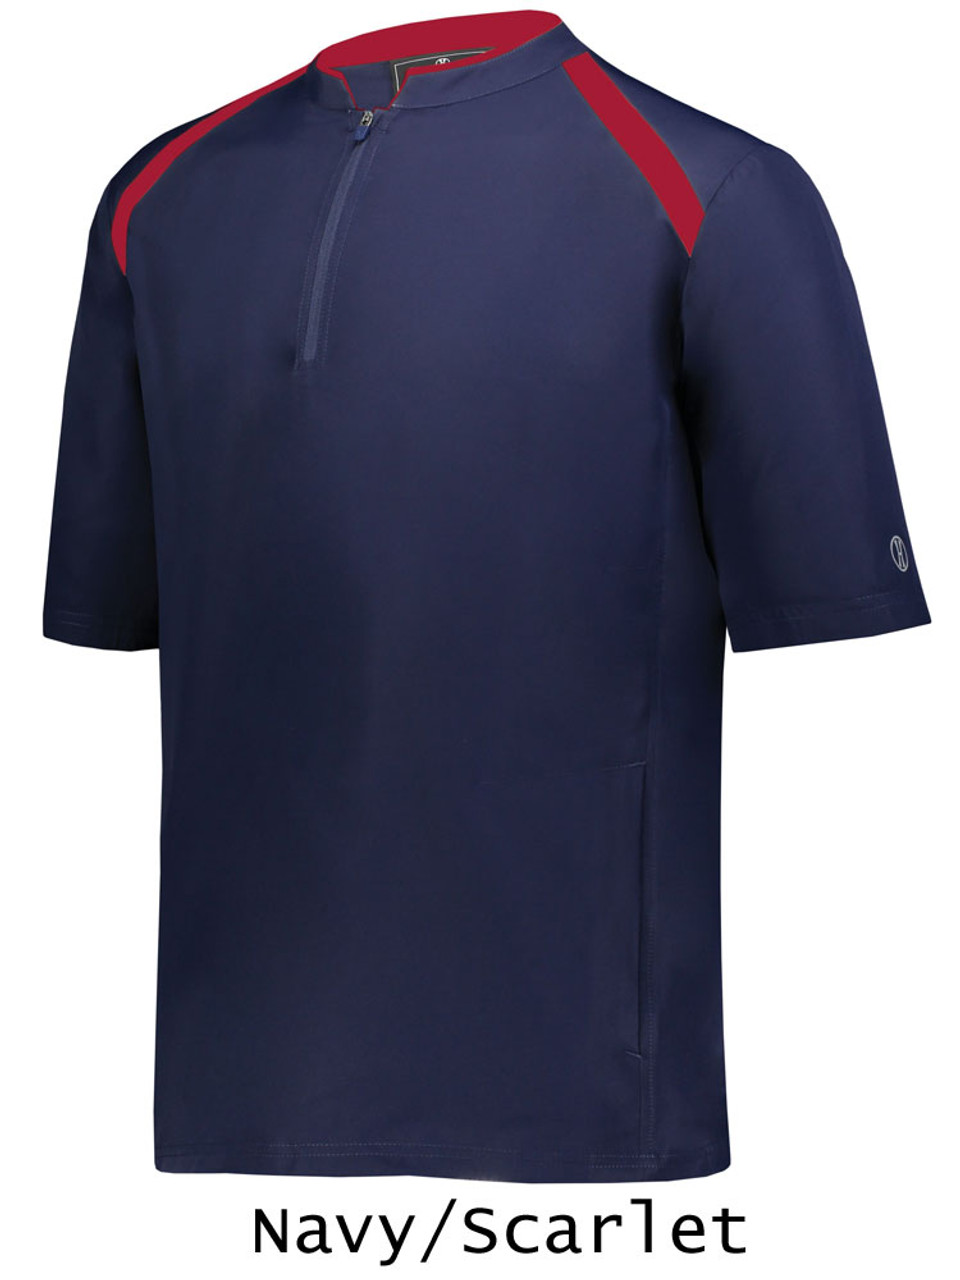 Louisville Slugger Adult Slugger Batting Cage Pullover with 1/4 Zip, Navy 